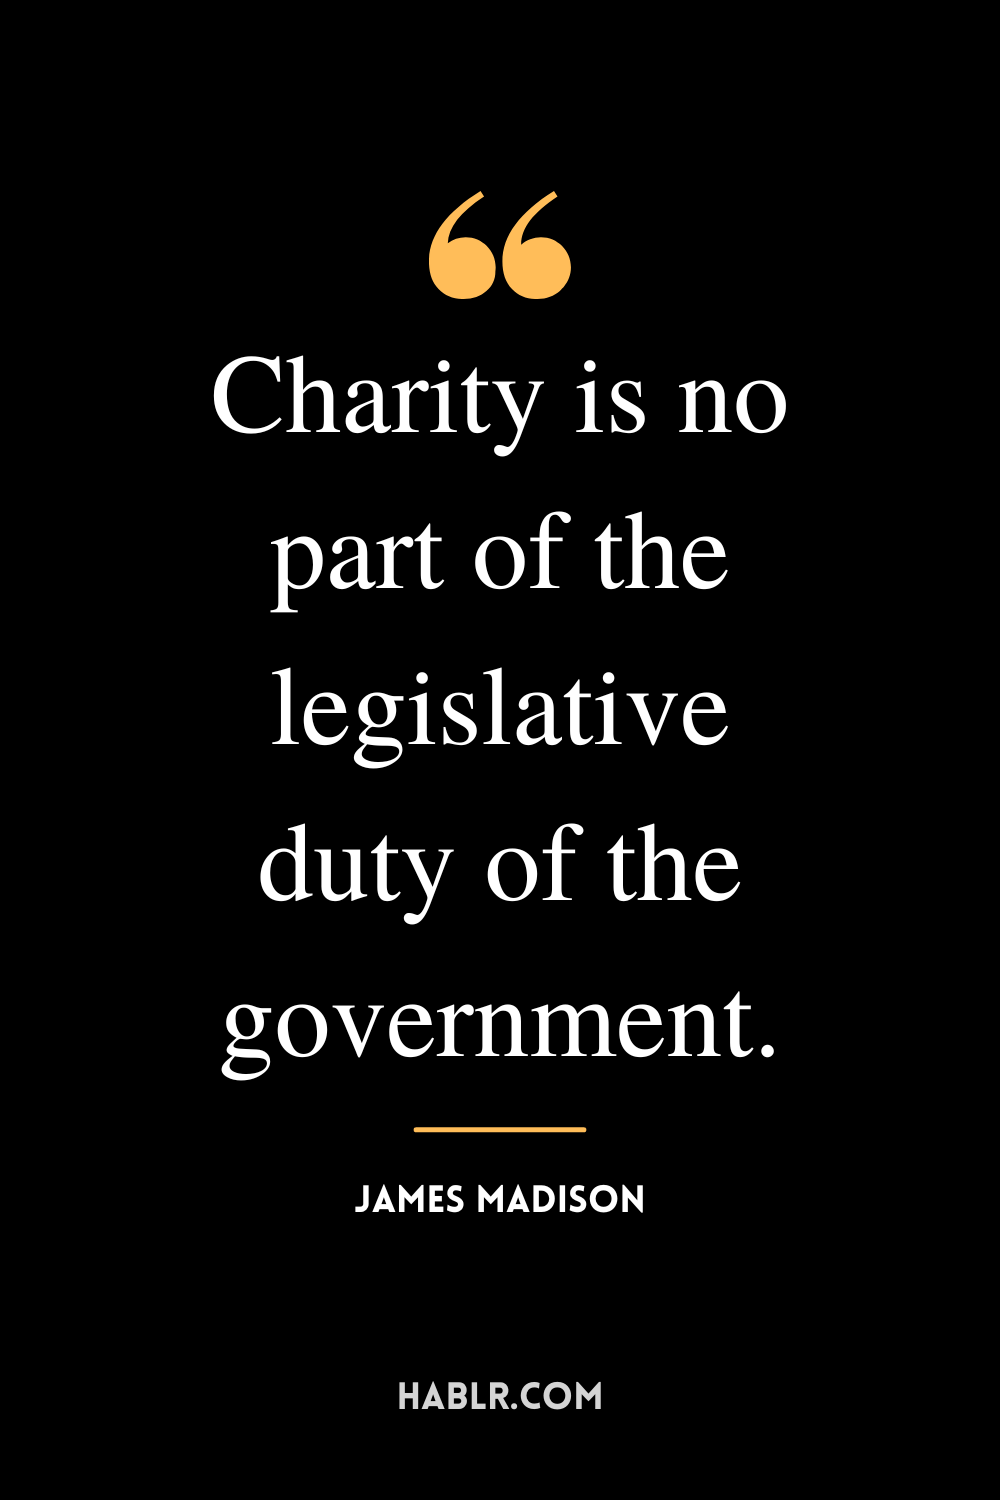 “Charity is no part of the legislative duty of the government.” -James Madison